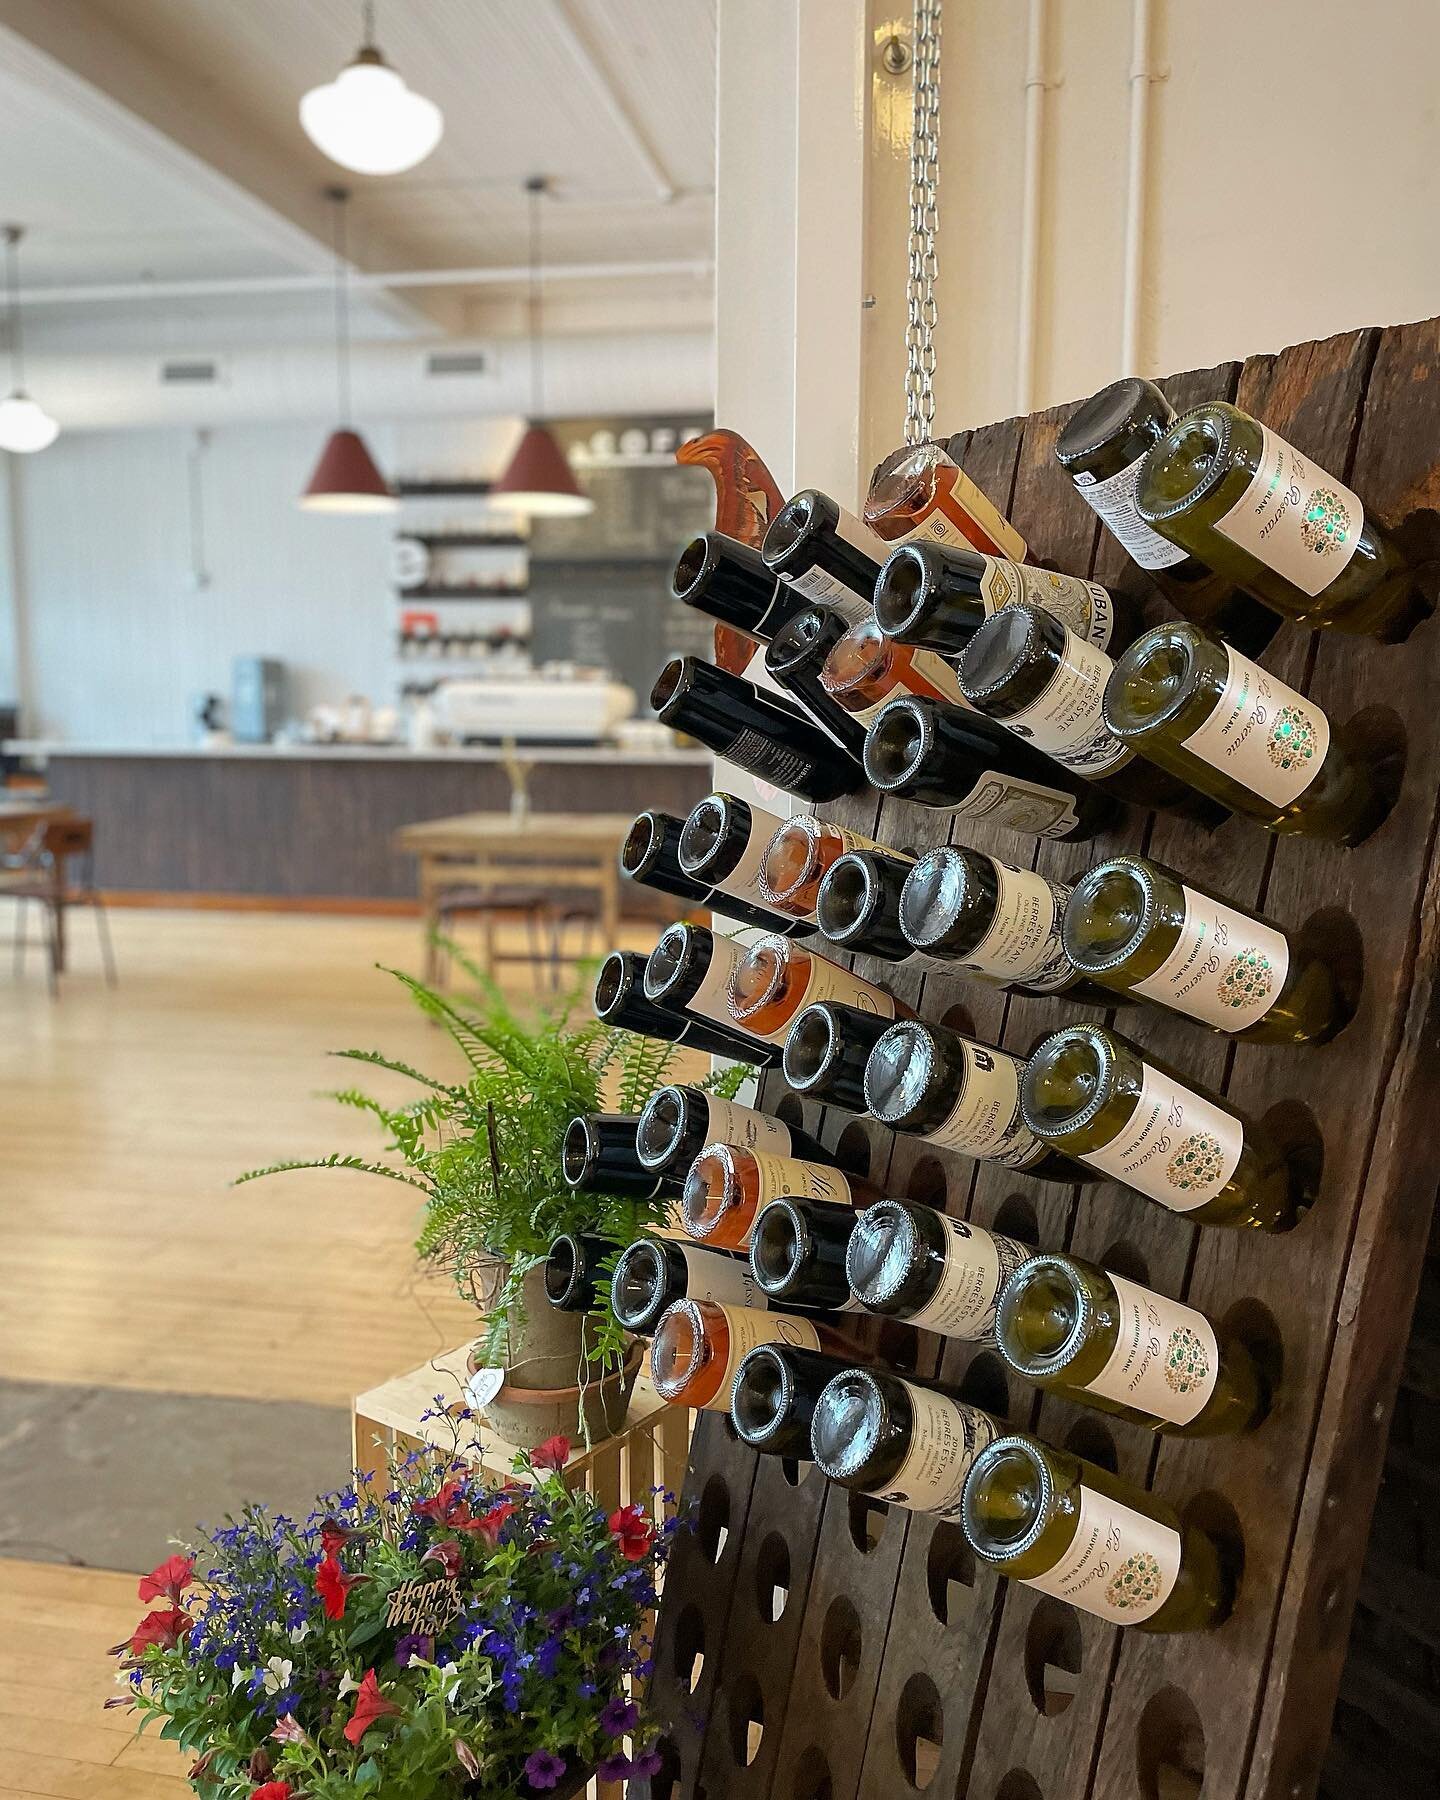 Have you noticed this new fixture in the Market? It displays our Elsewhere curated wine selection🍷

All are available for purchase. See the market counter for details. 

&mdash; &bull; &mdash;
#elsewheremarket #itsavibe 
#boutiqueshopping #downtowno